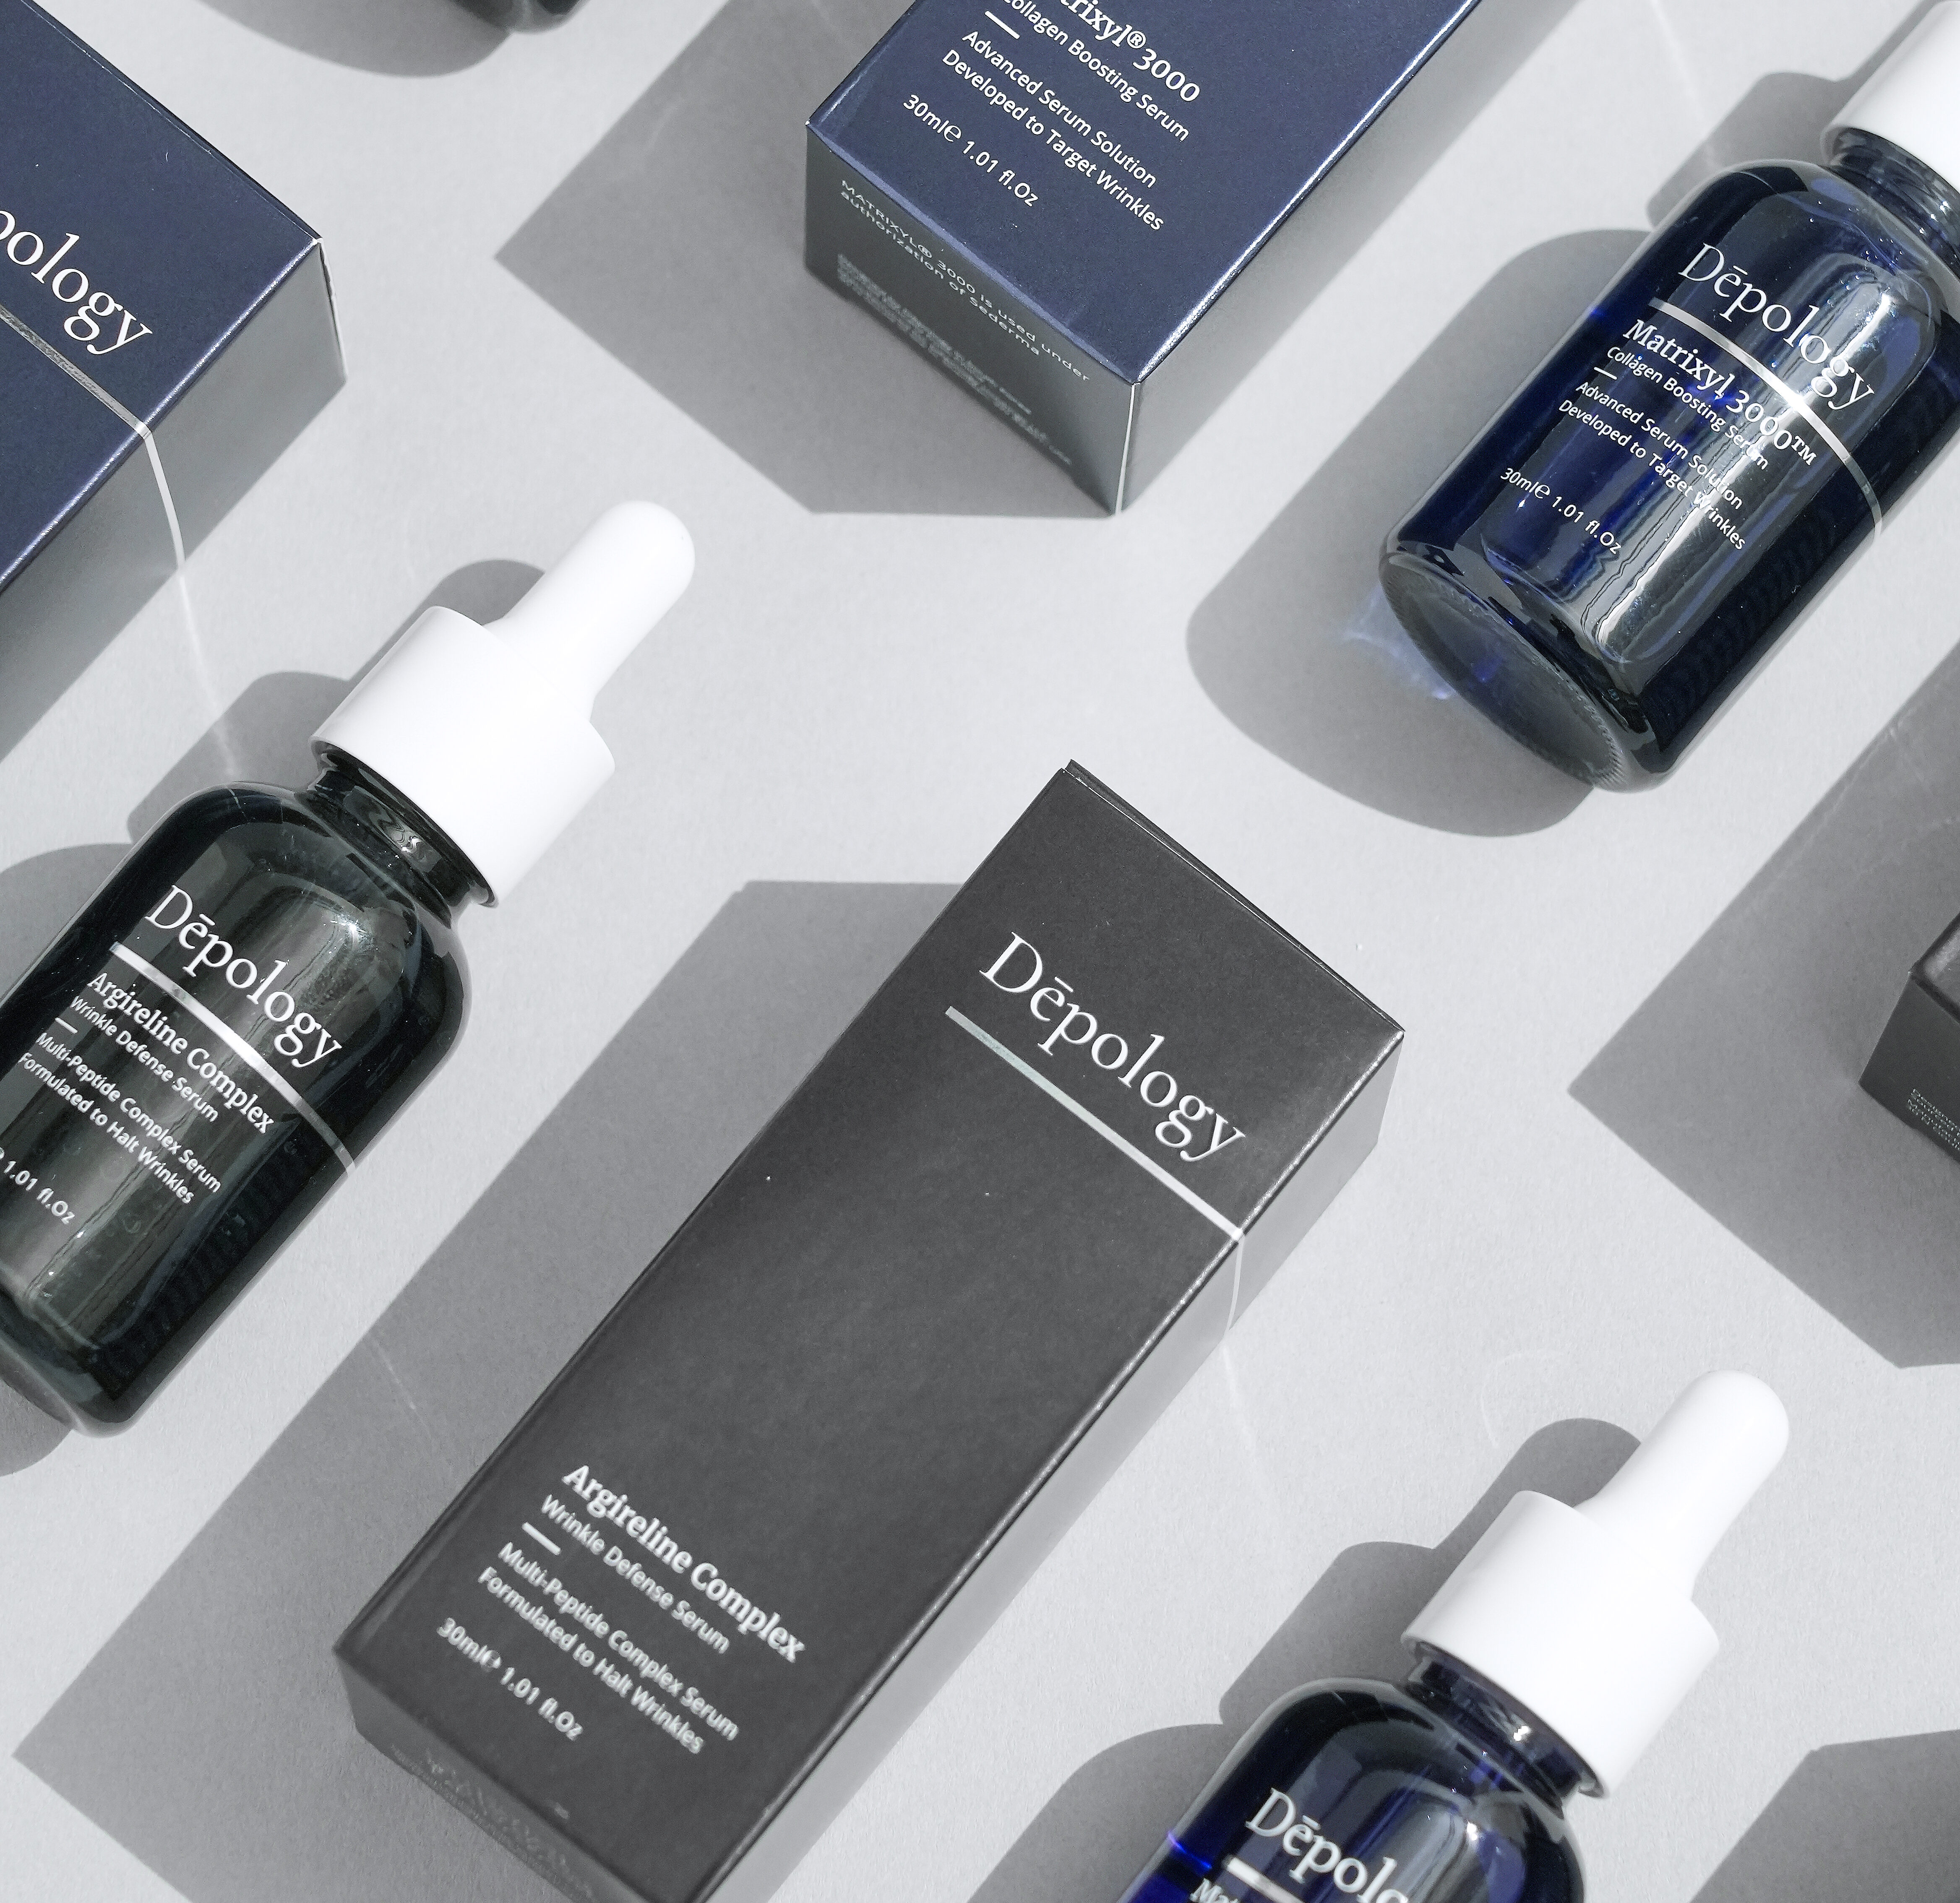 This Viral Korean Skincare Brand is Taking the Beauty World by Storm